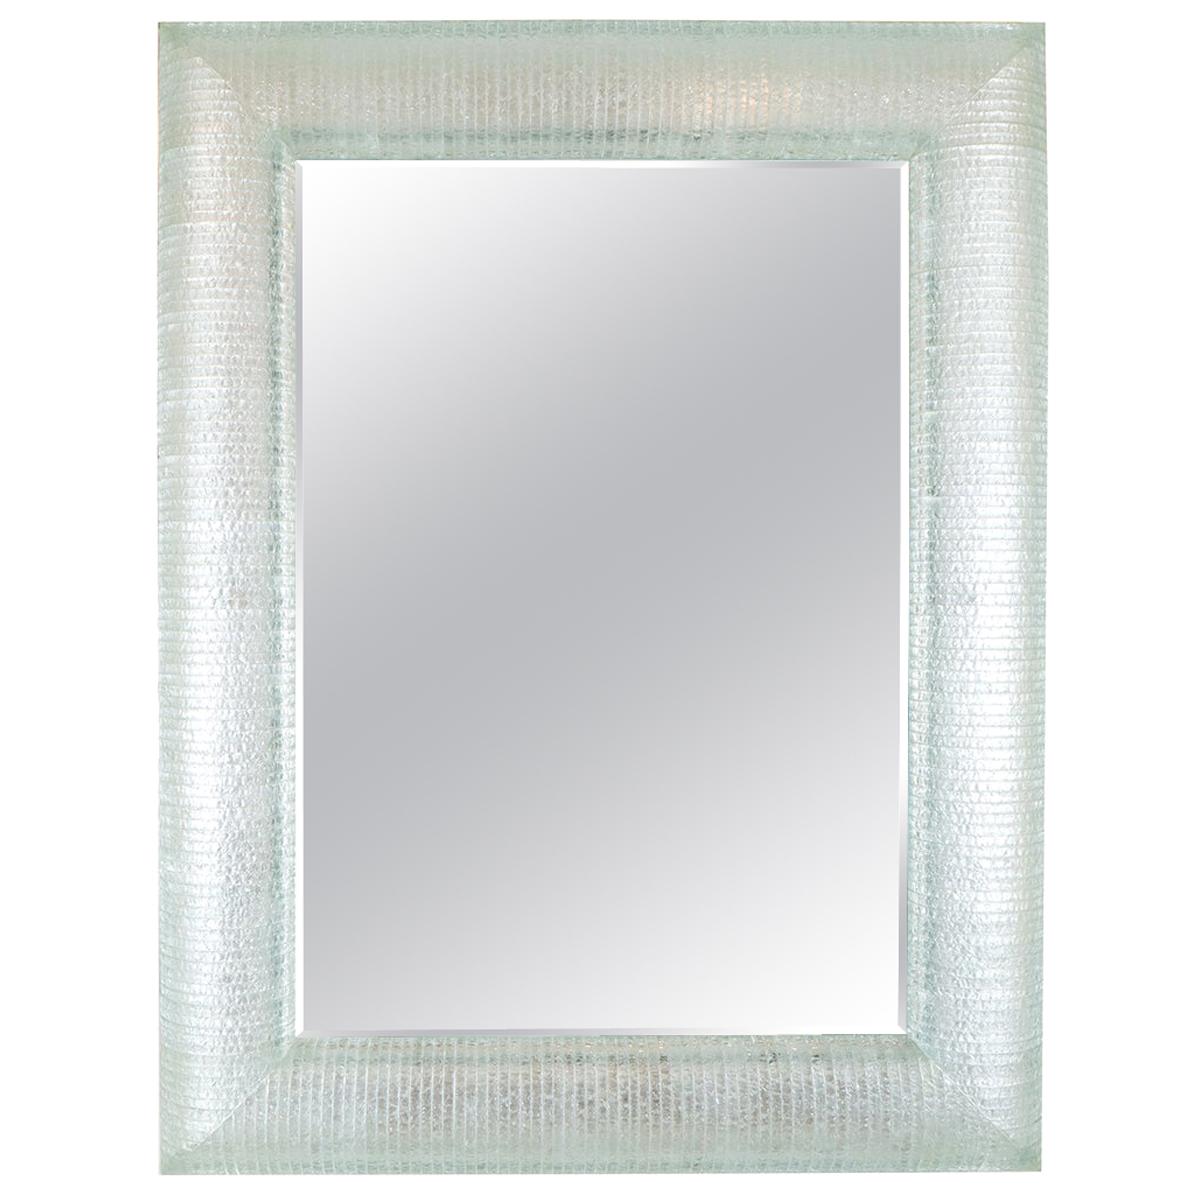 Rectangular Mirror Featuring Curved and Layered Glass Surround